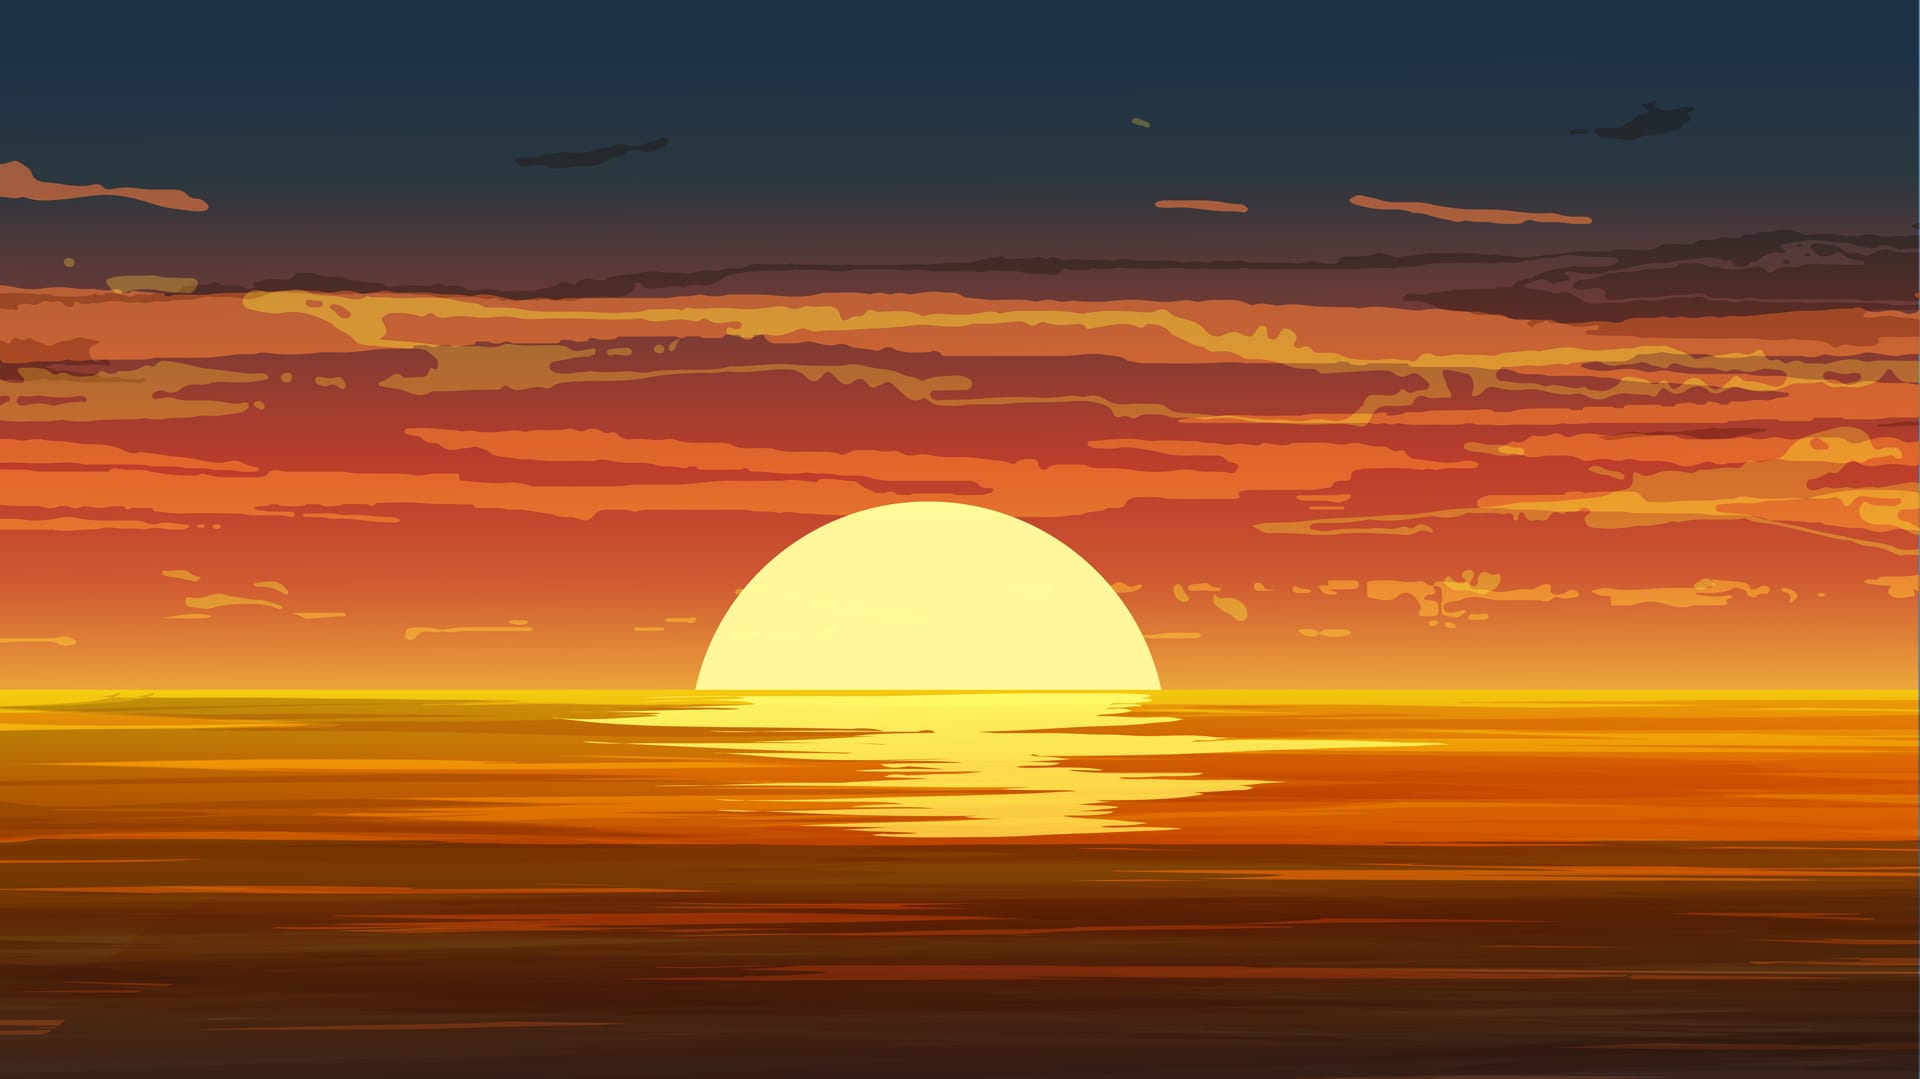 Sunset clipart dramatic red sky sunset ocean